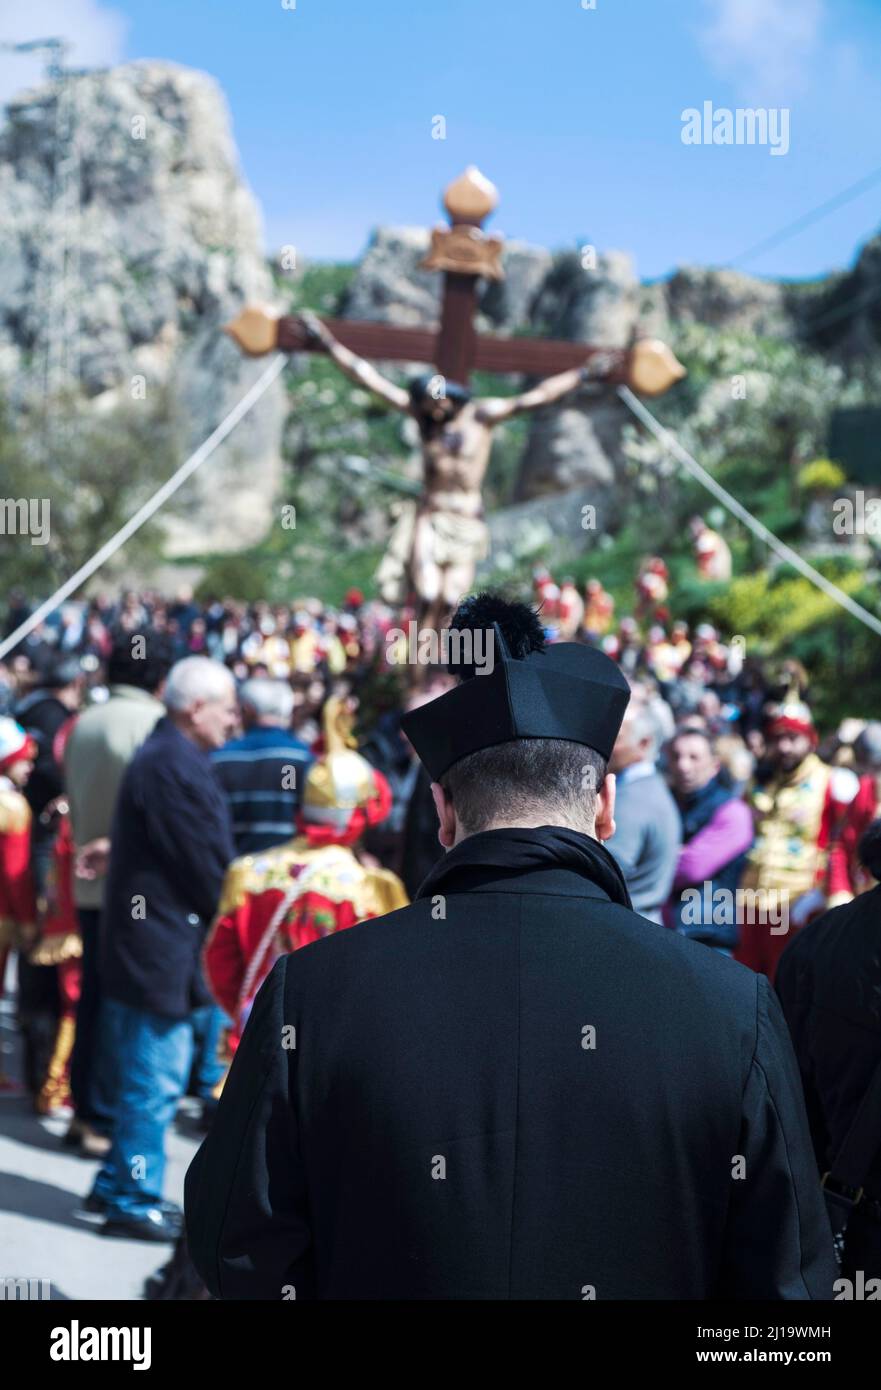 The Parish Priest during the Holy Week processions on the mountain village of San Fratello, province of Messina, Sicily, Italy Stock Photo